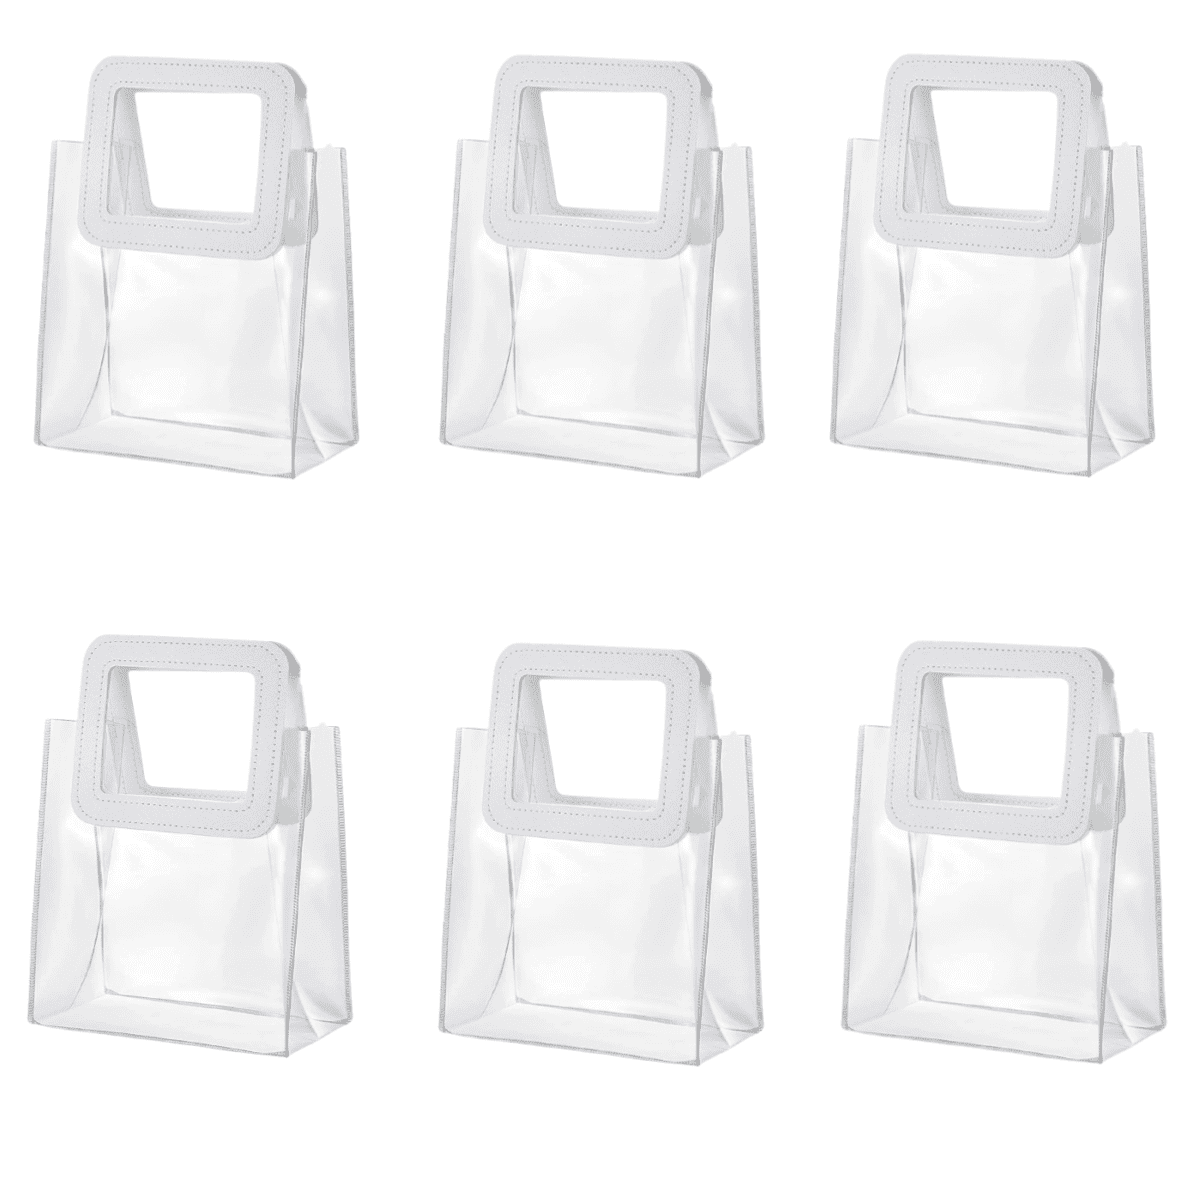 Clear PVC Gift Bags 9x6.7x2.8 Reusable Mini Plastic Gift Wrap Tote Bag with Handles, 100 Pack